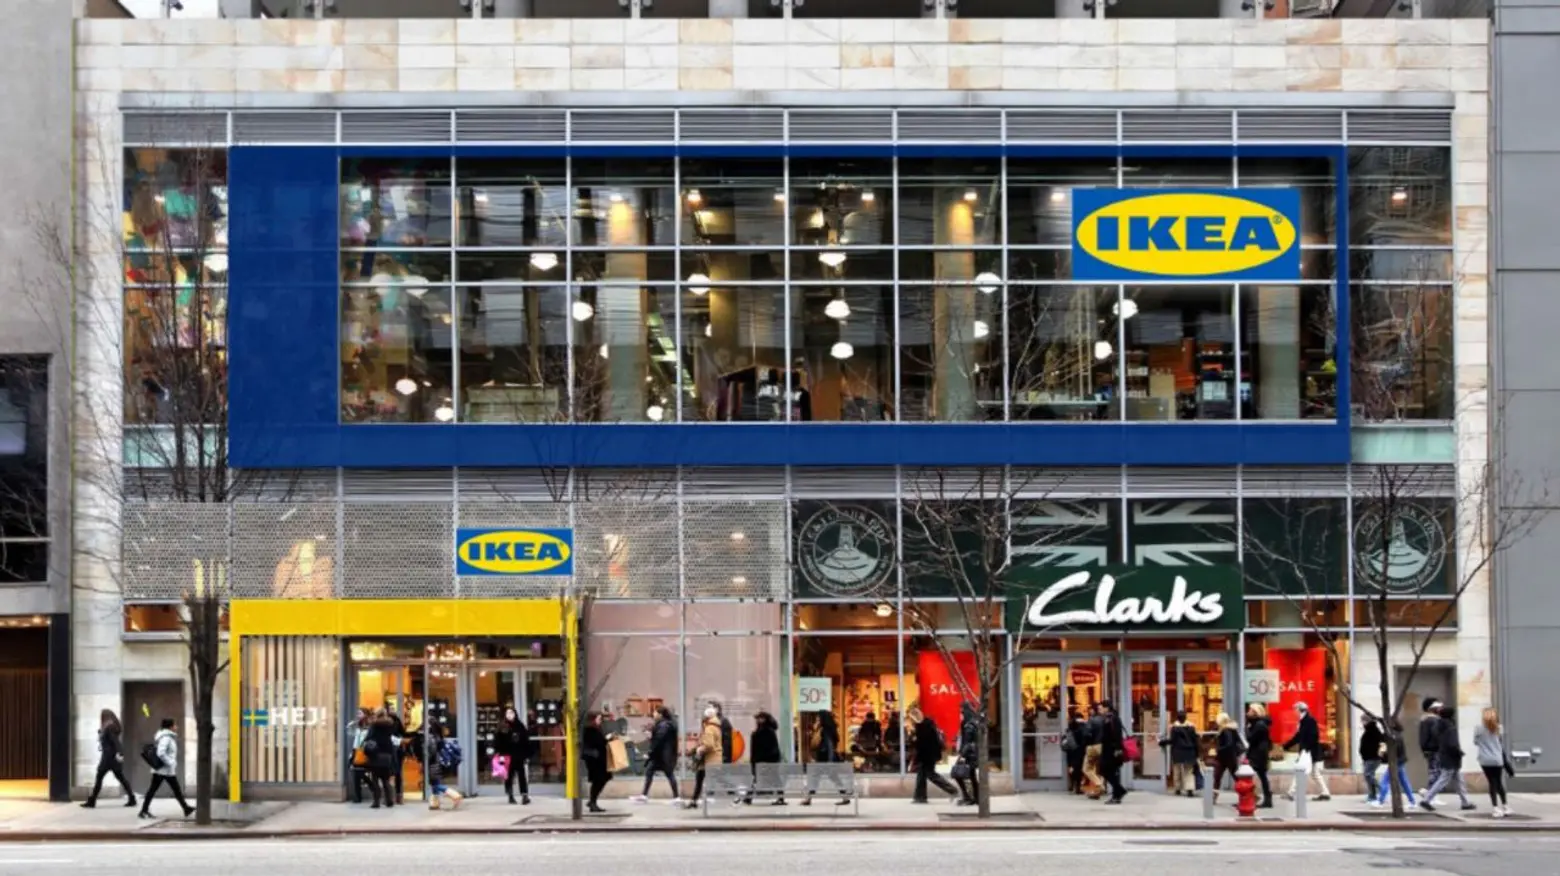 Ikea’s first Manhattan store will open this spring on East 59th Street